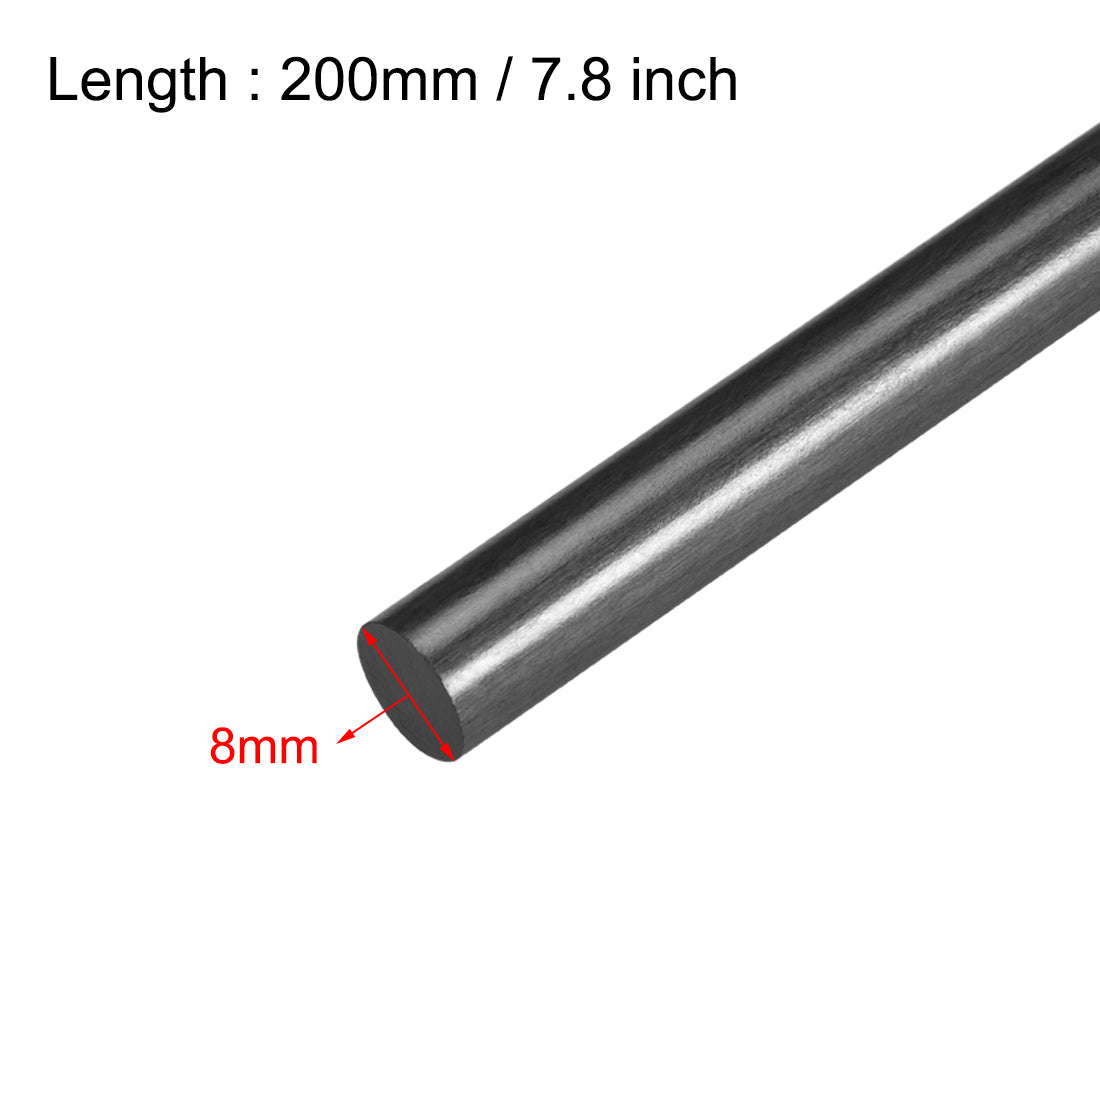 Uxcell Uxcell 9.5mm Carbon Fiber Rod For RC Airplane Matte Pole US, 200mm 7.8 inch, 2pcs